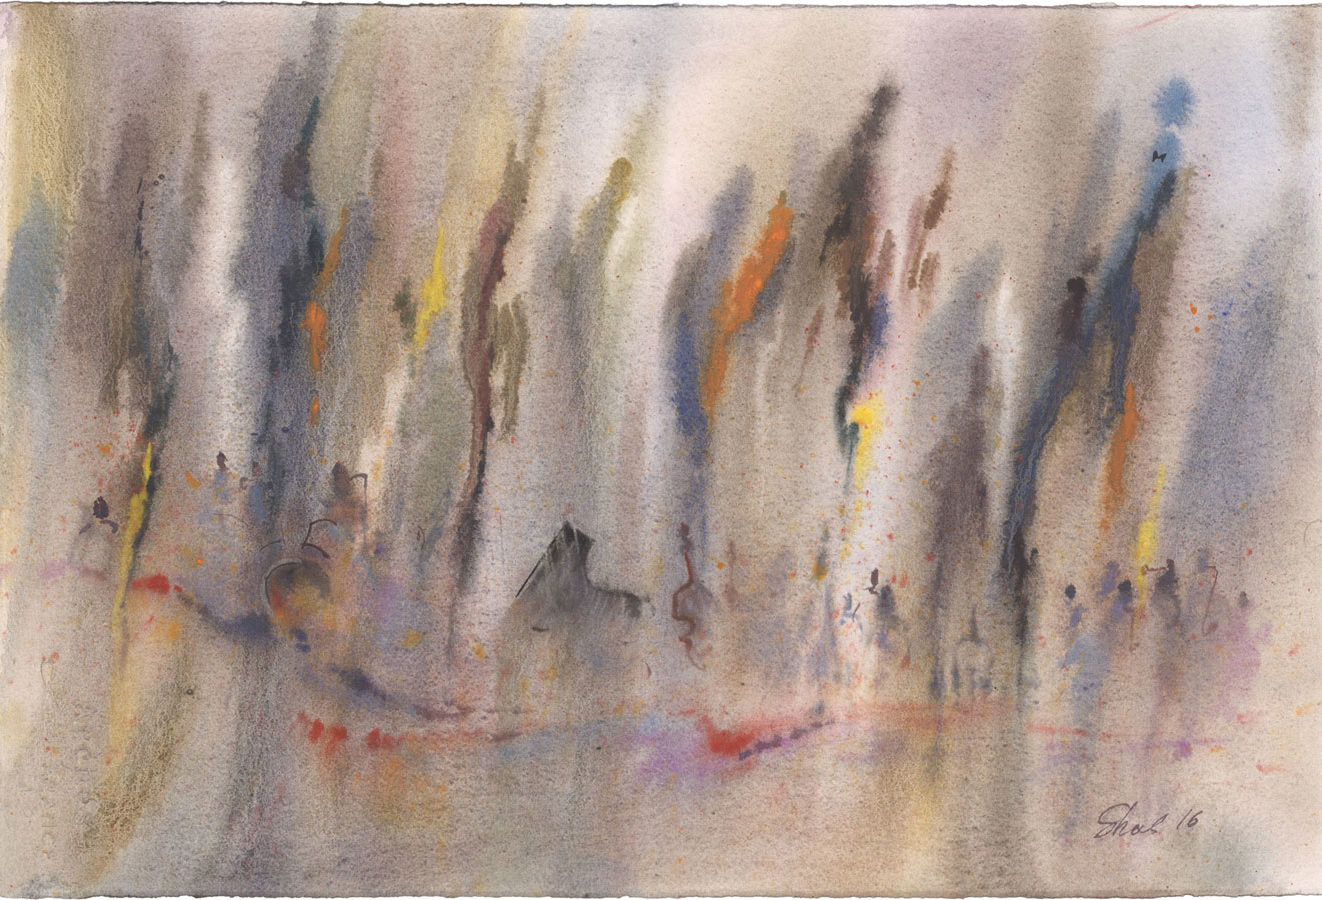 Watercolor wet-on-wet Shalumov Jazz the sounds abstract contemporary art free style